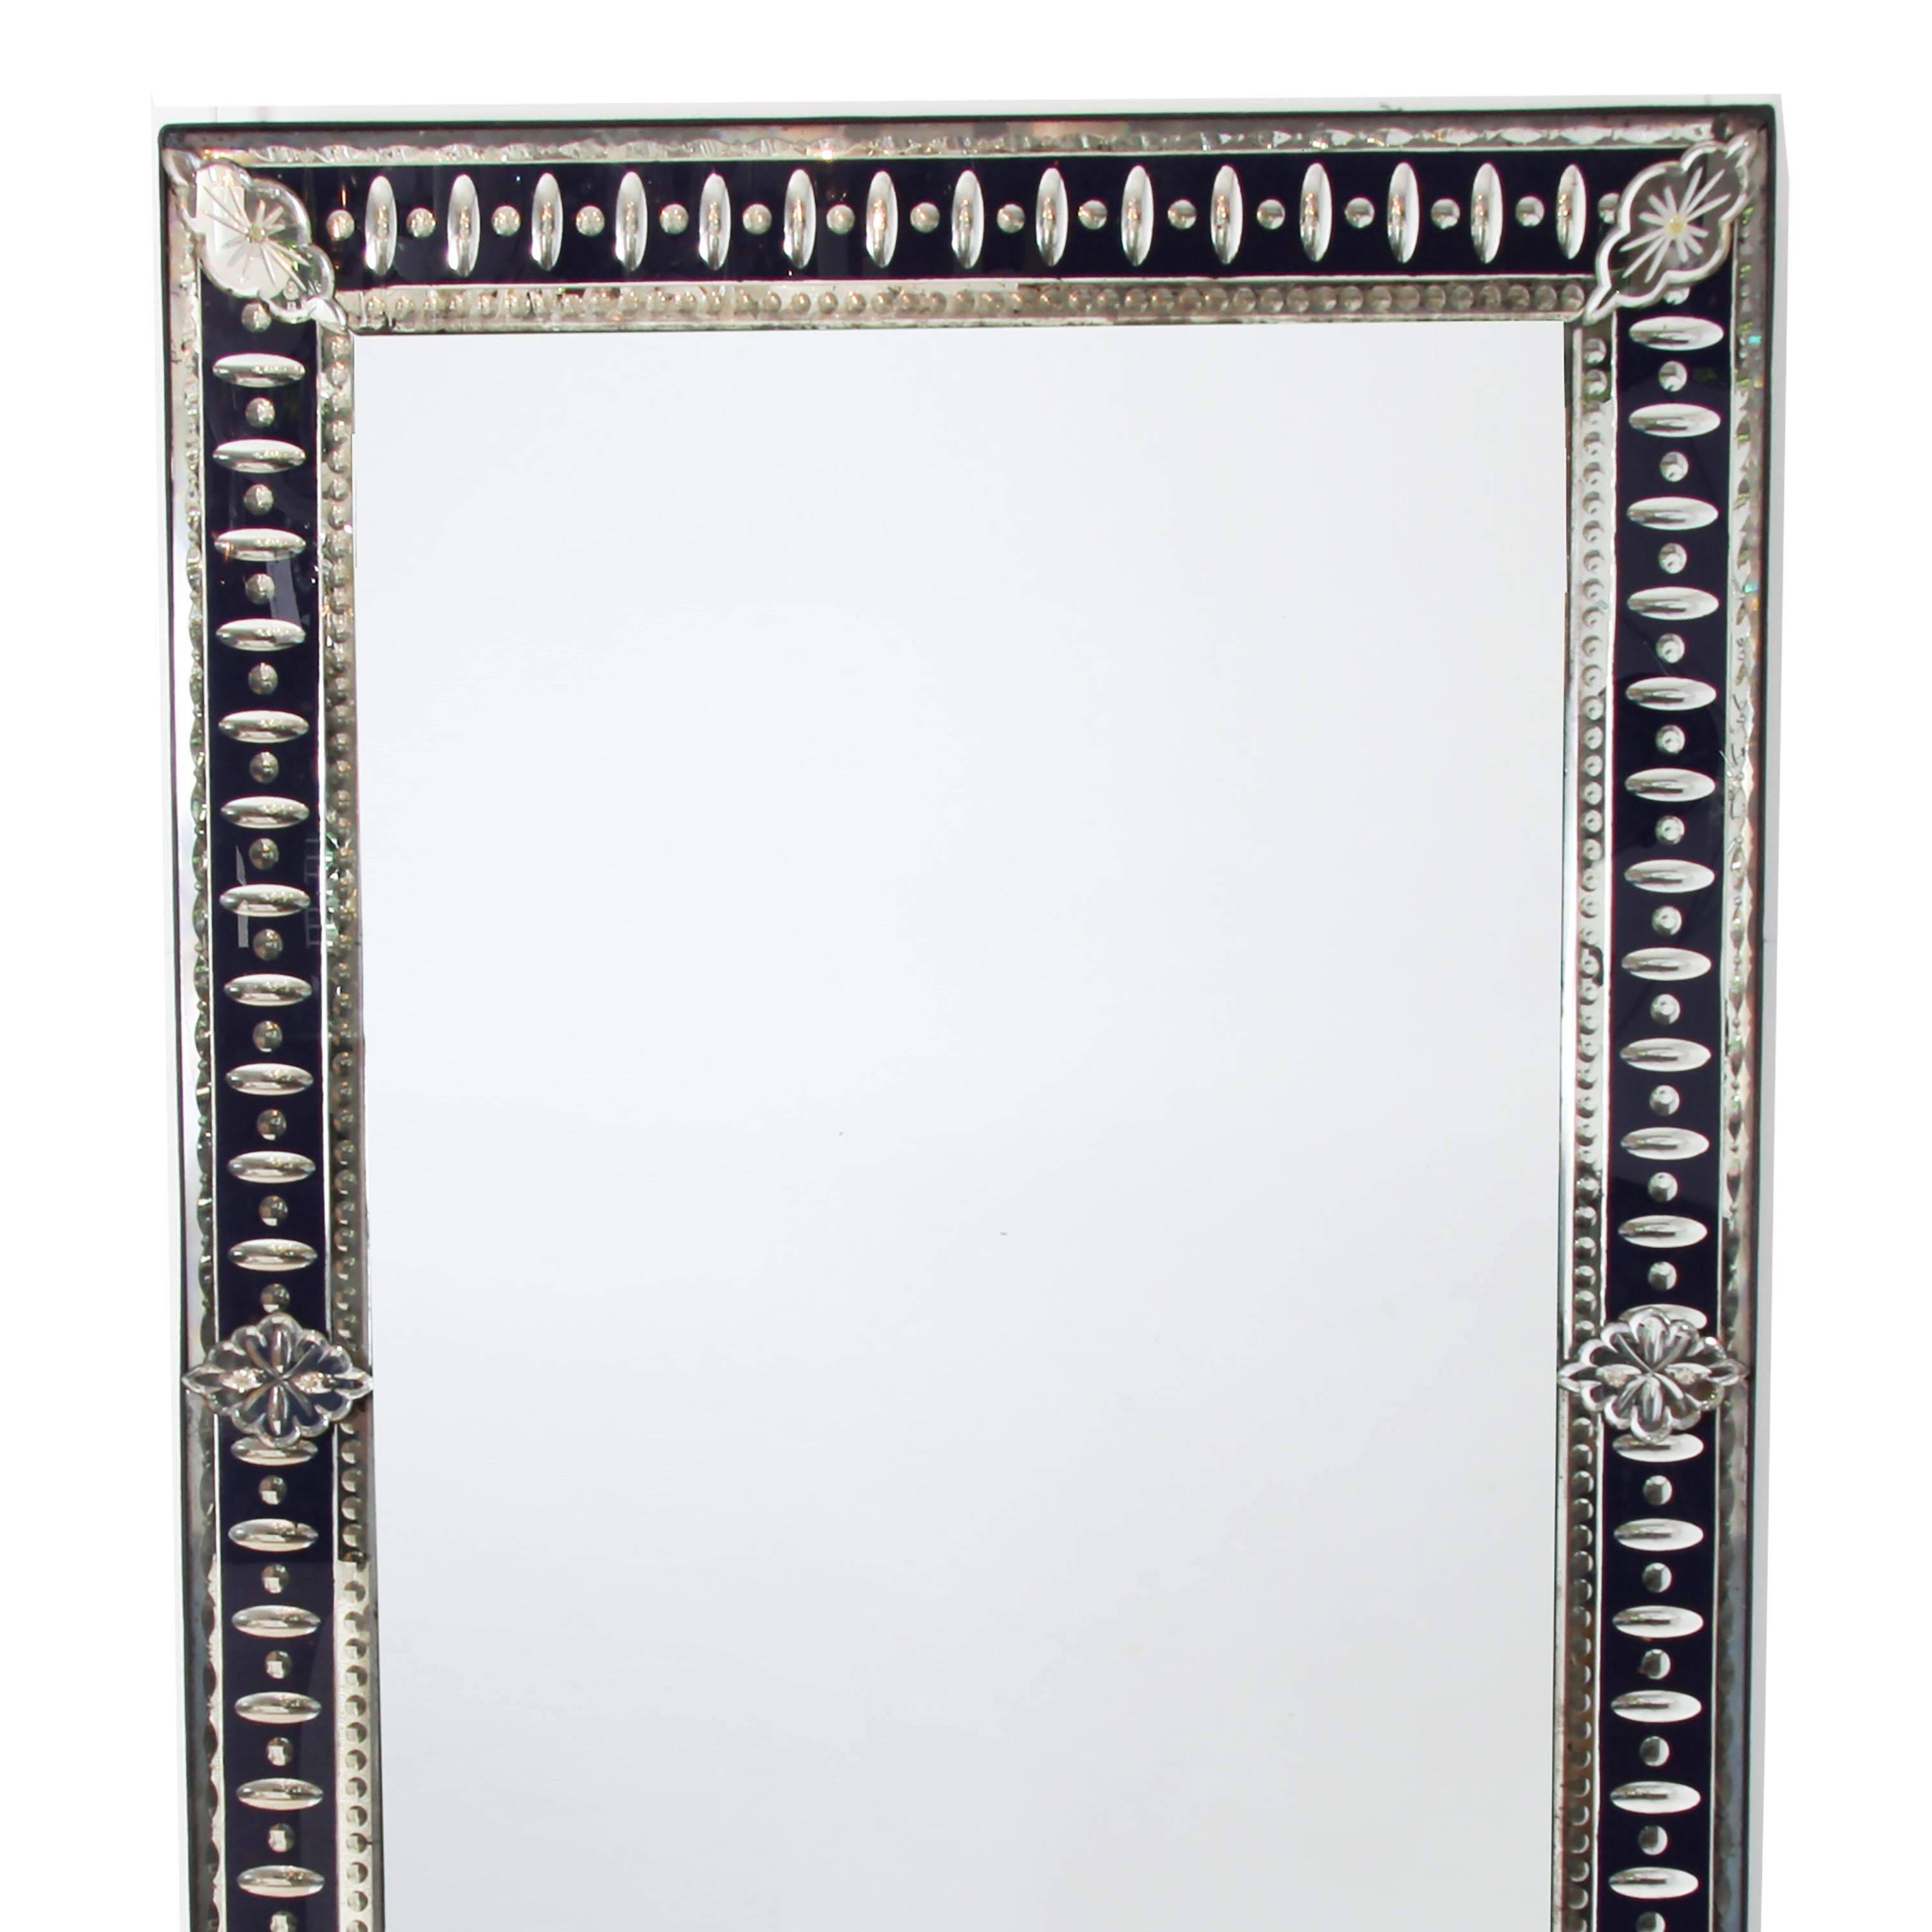 French 'Venetian' mirror made in the 1920s, this lovely piece has the original glass and the frame is an unusual midnight blue.